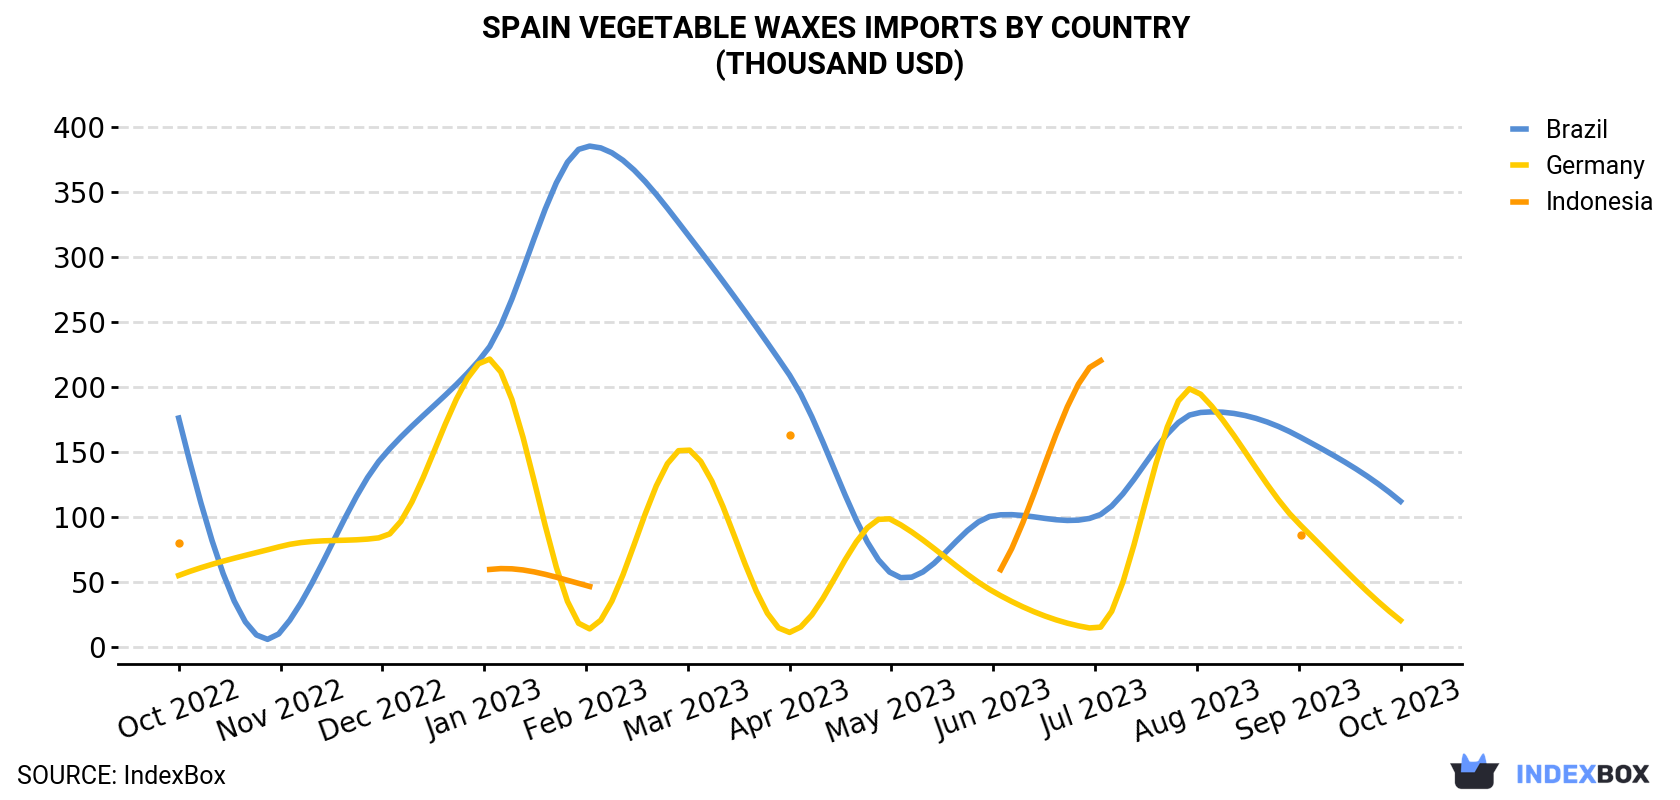 Spain Vegetable Waxes Imports By Country (Thousand USD)